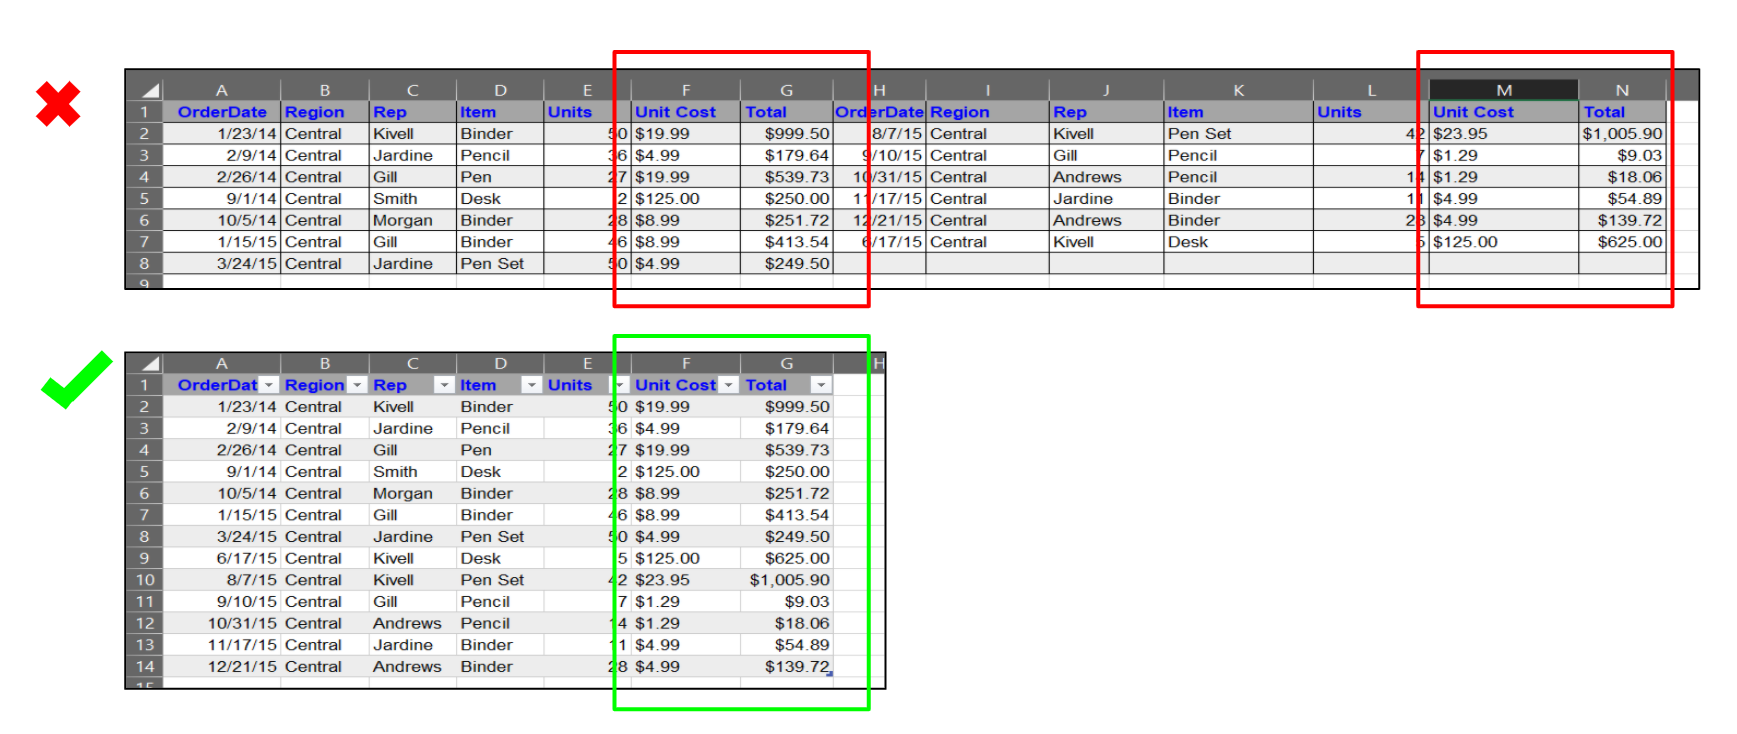 Excel screenshot - example of how to properly categorize flat and calculated fields